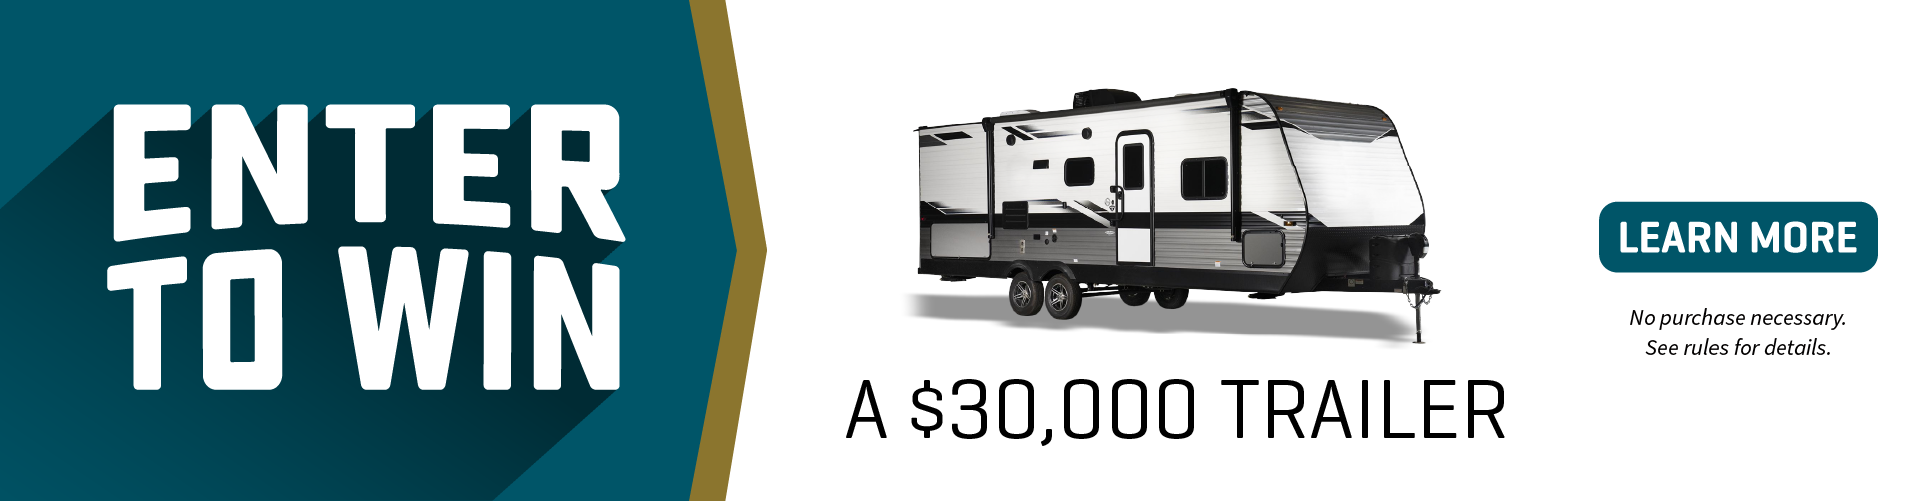 Enter To Win A $30,000 Travel Trailer